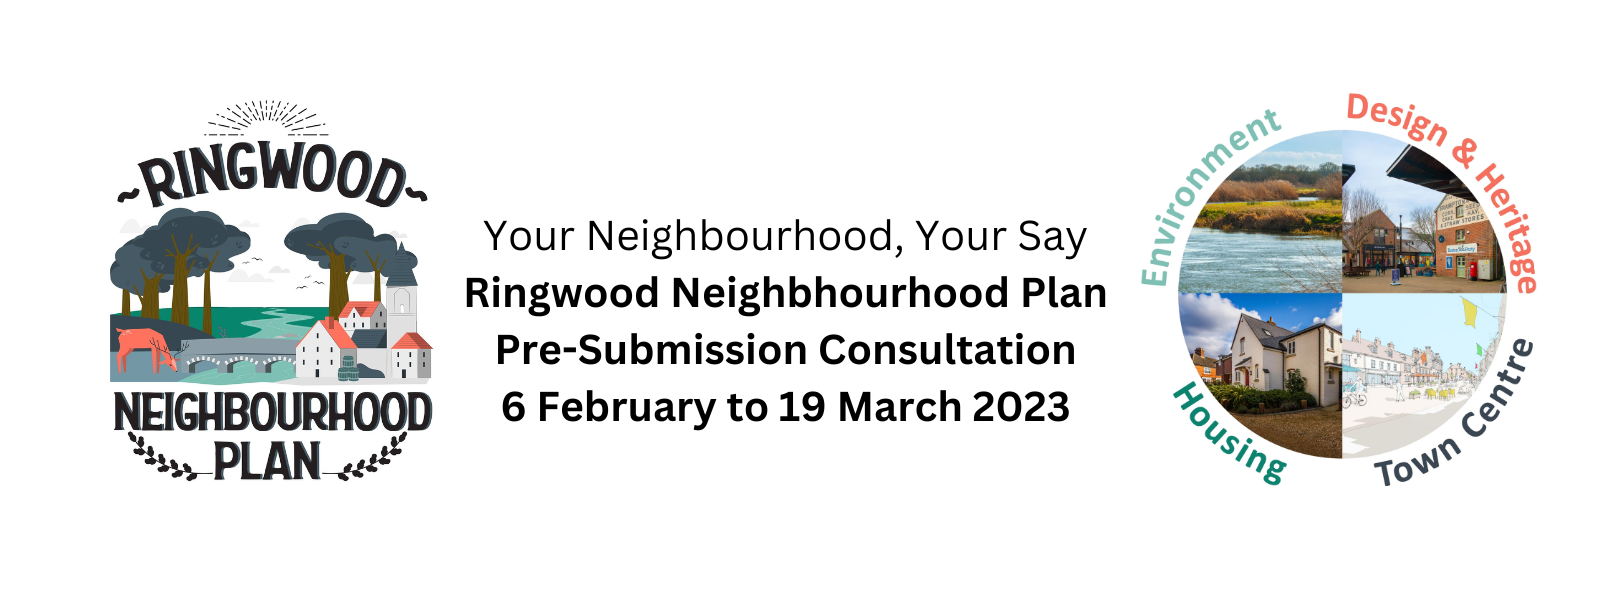 Your Neighbourhood, Your Say - Consultation on Ringwood Neighbourhood Plan 2023-2036 Pre-Submission Document